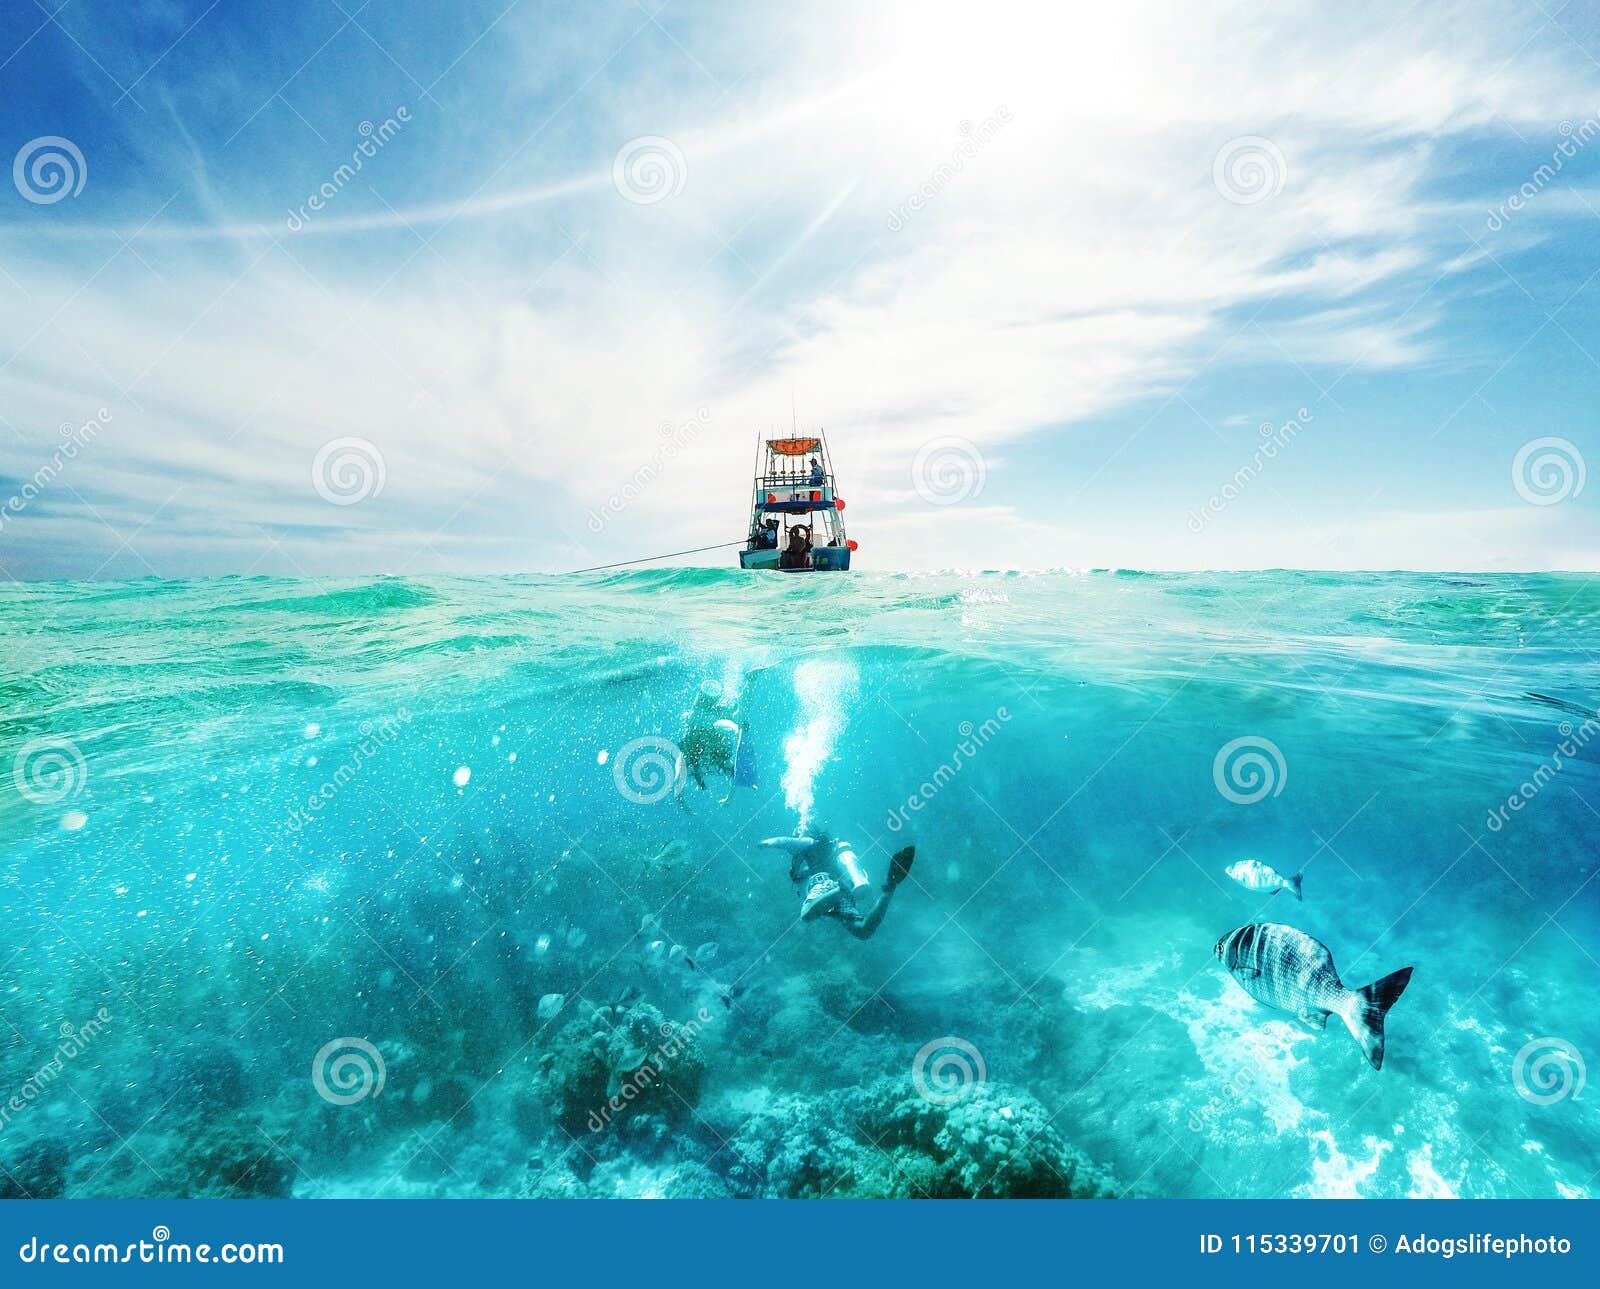 divers and boat in the caribbean sea